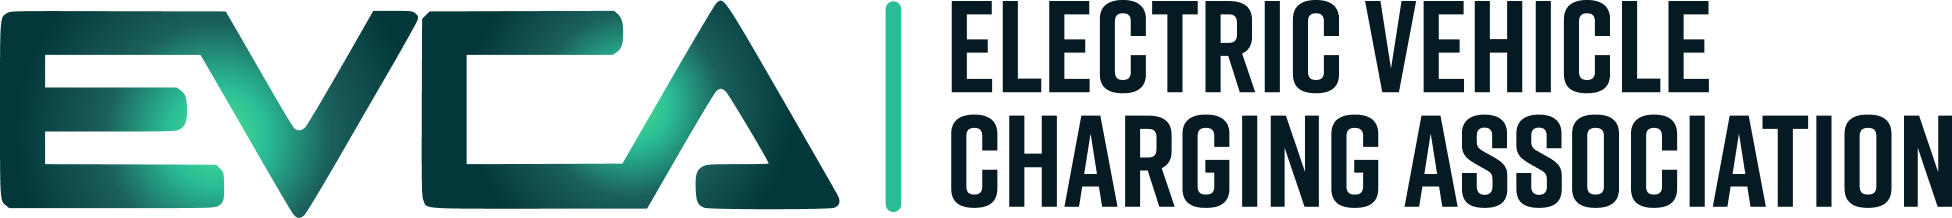 EVCA | EVCA is a trade association representing EV charging infrastructure